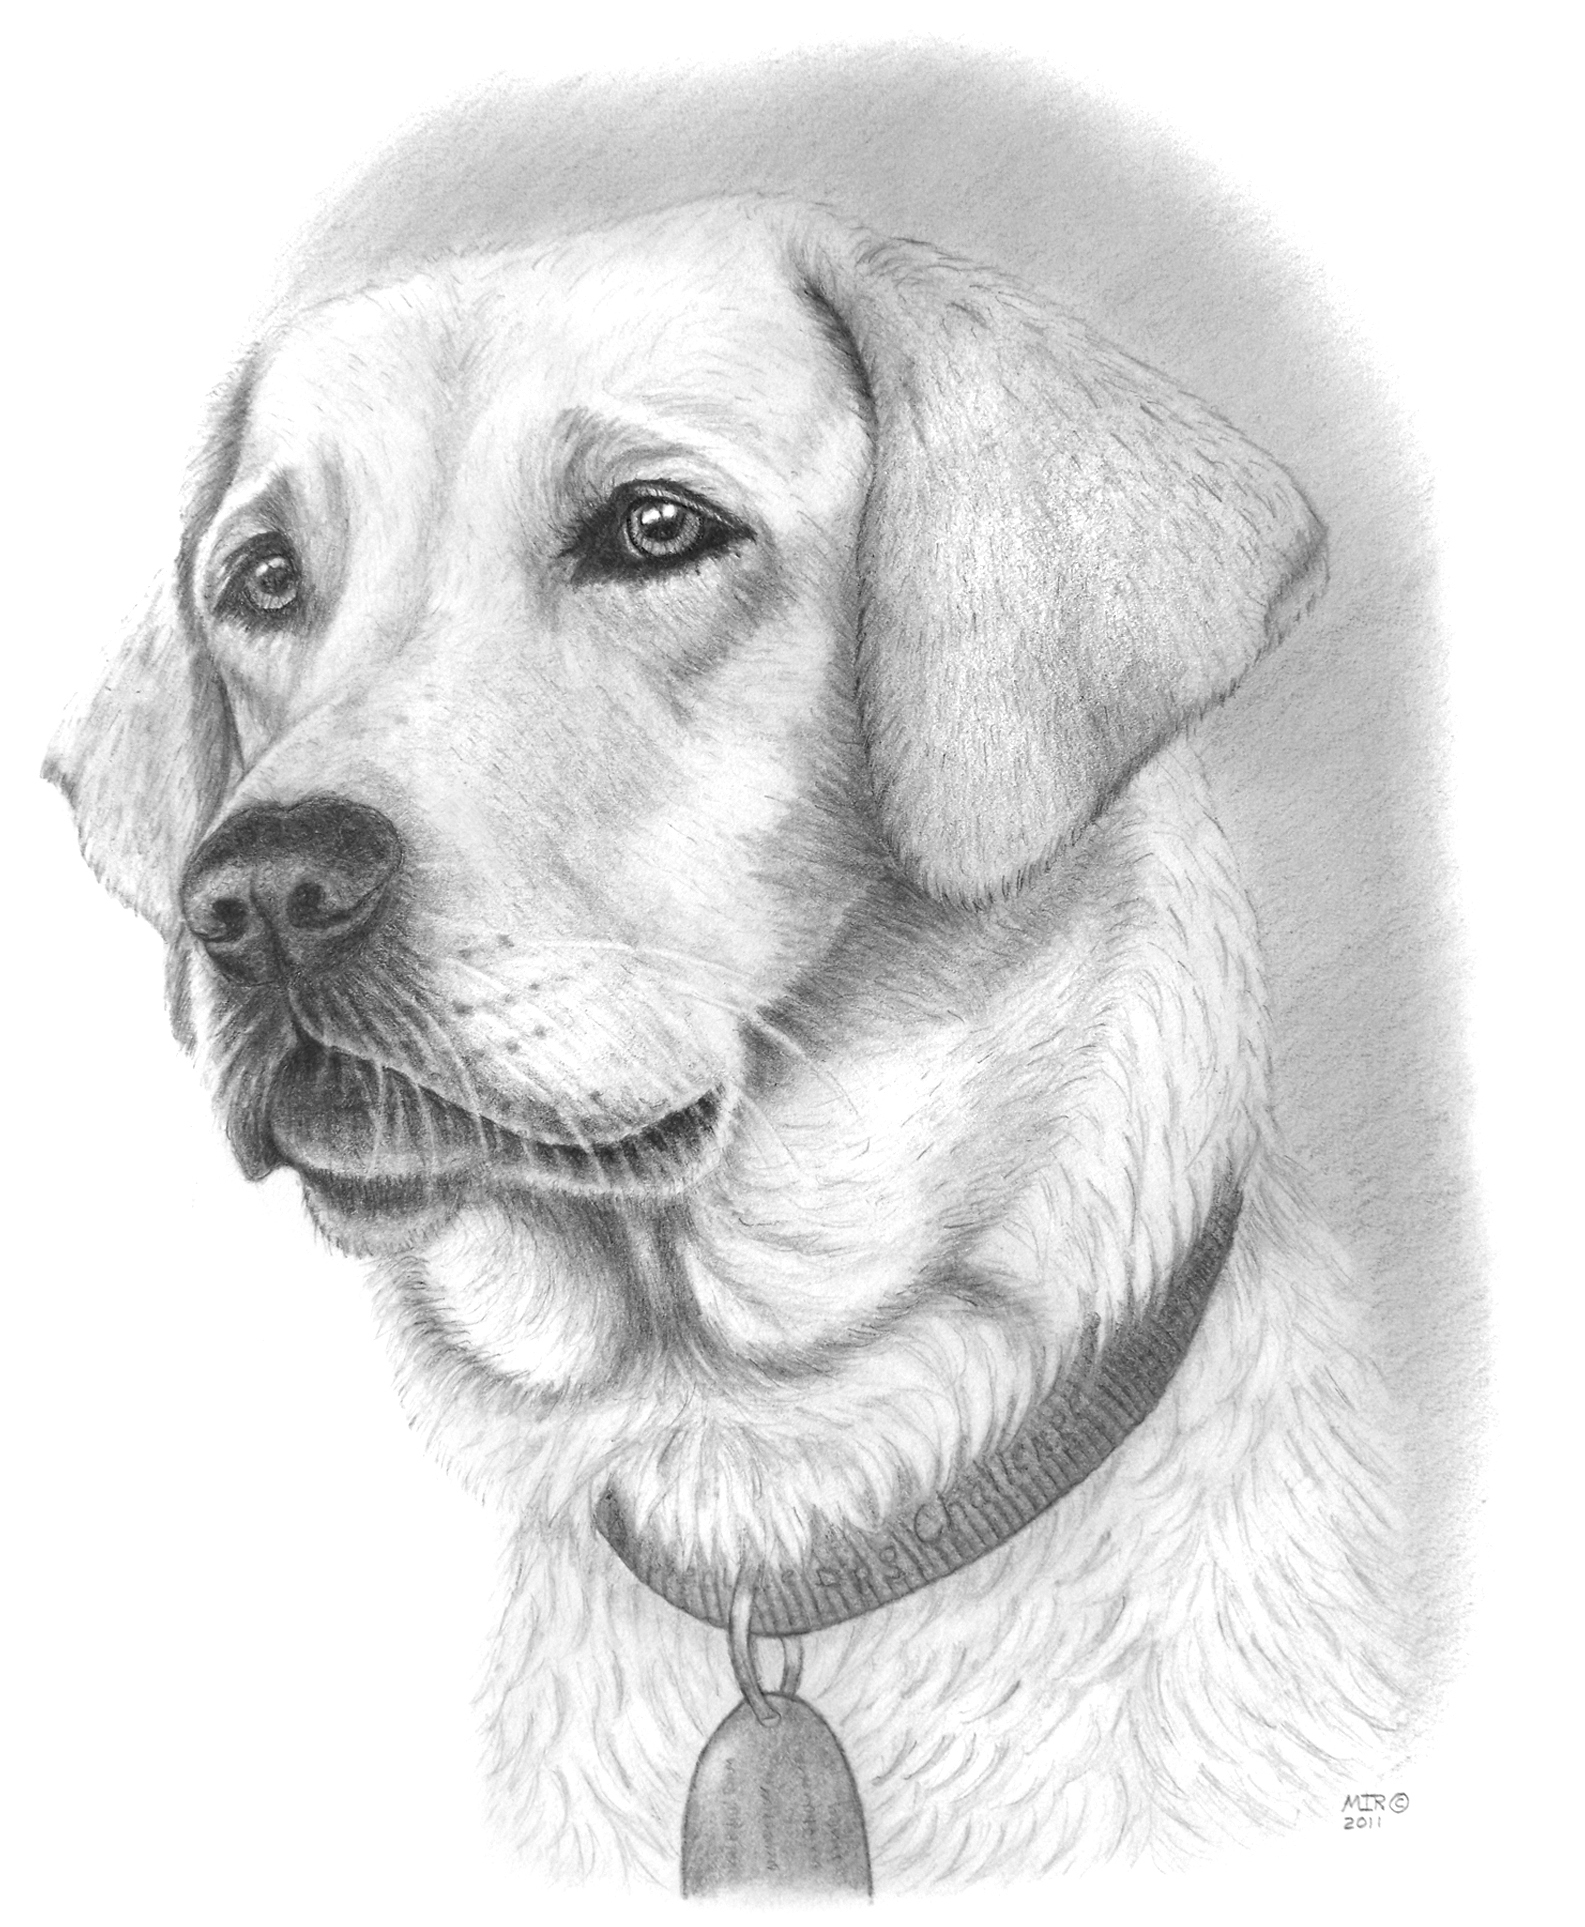 How to Draw Dogs, Step by Step, Pets, Animals, FREE Online Drawing